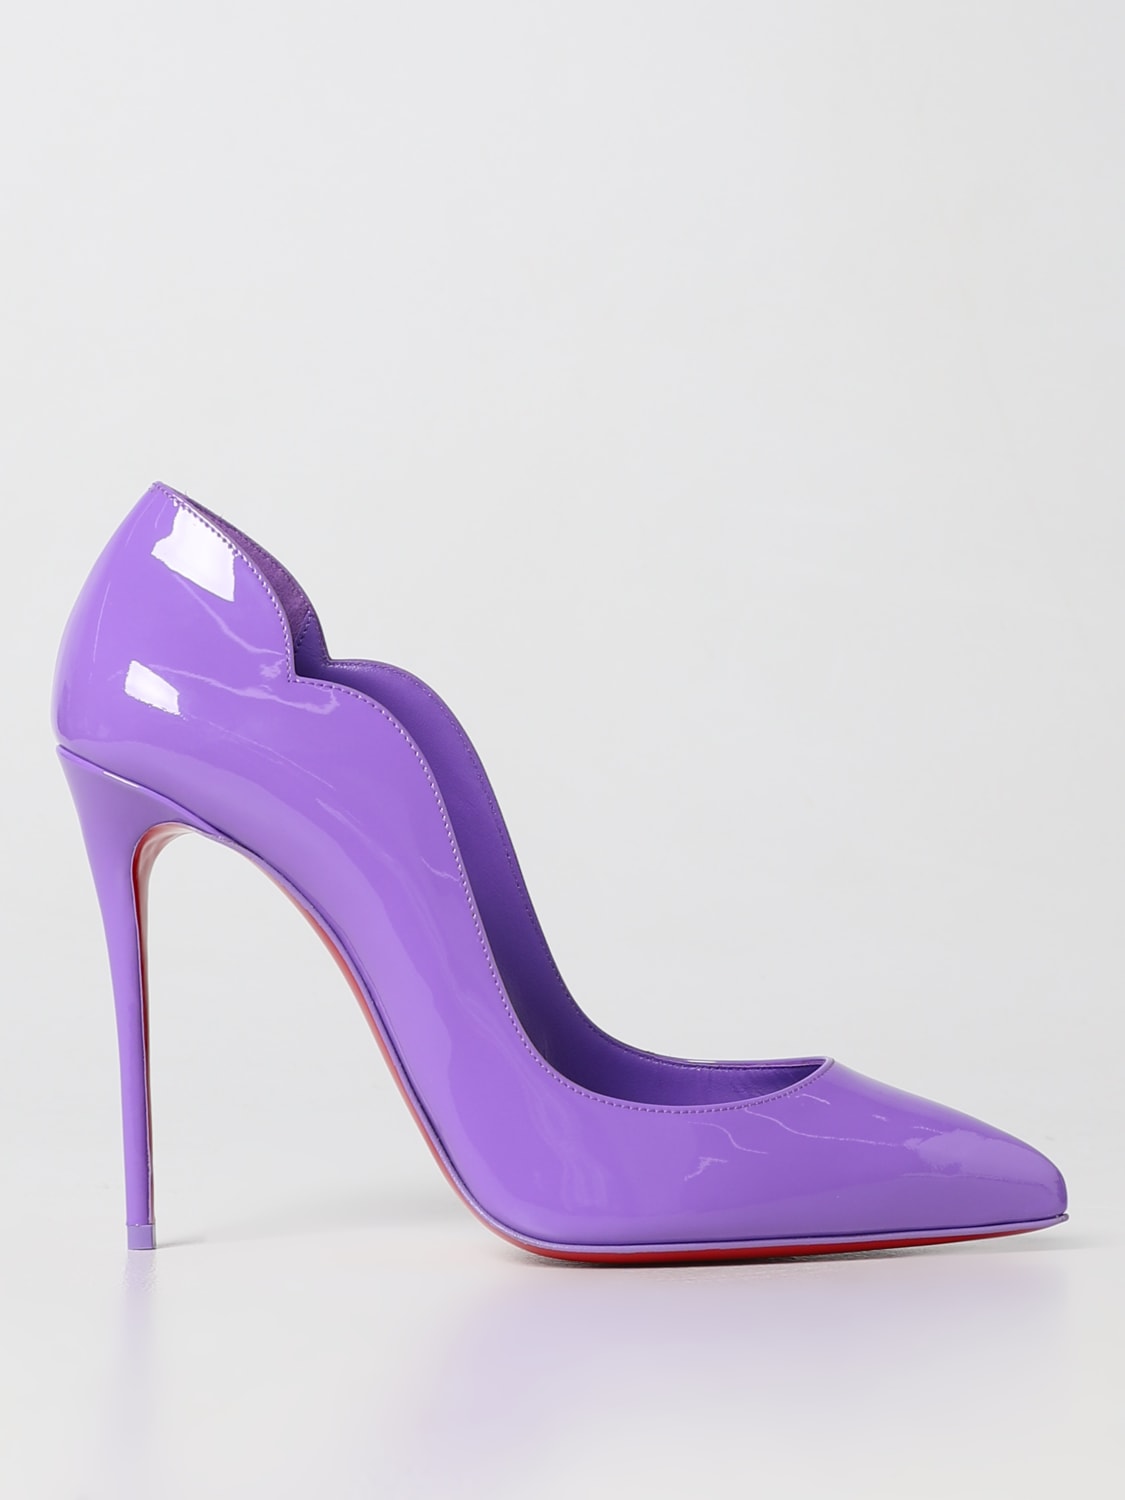 LOUBOUTIN: Hot Chick pumps in patent leather - Lilac | Christian Louboutin pumps 3200645 online at GIGLIO.COM